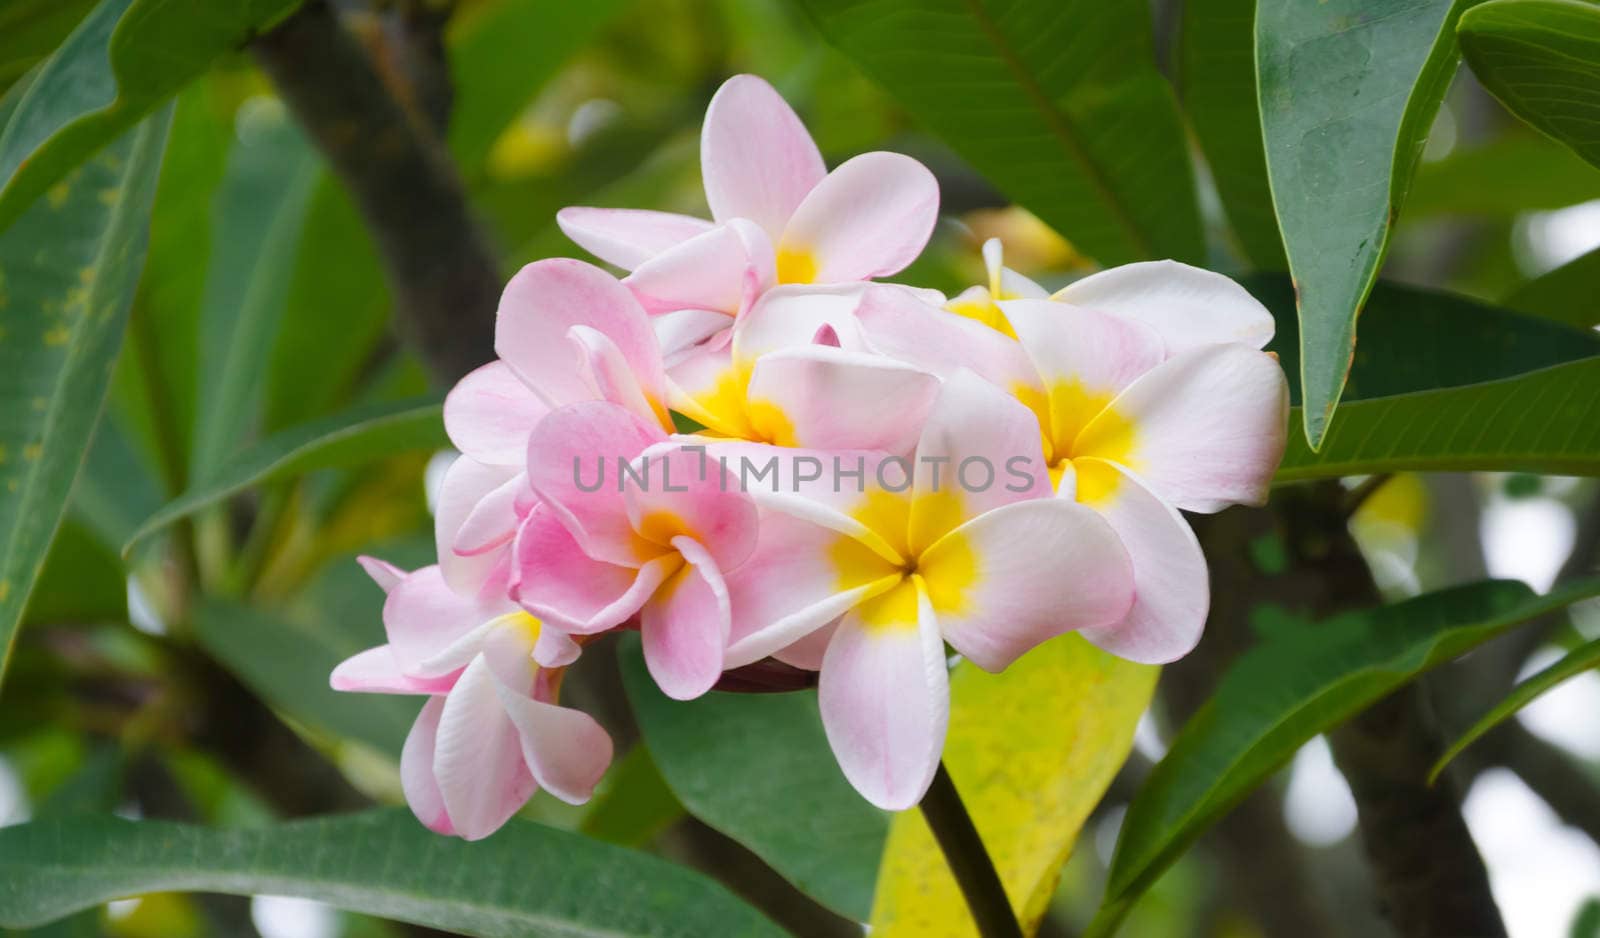 Pink Frangipani (plumeria) flower in a natural environment, including leaves, Hawaii, USA
